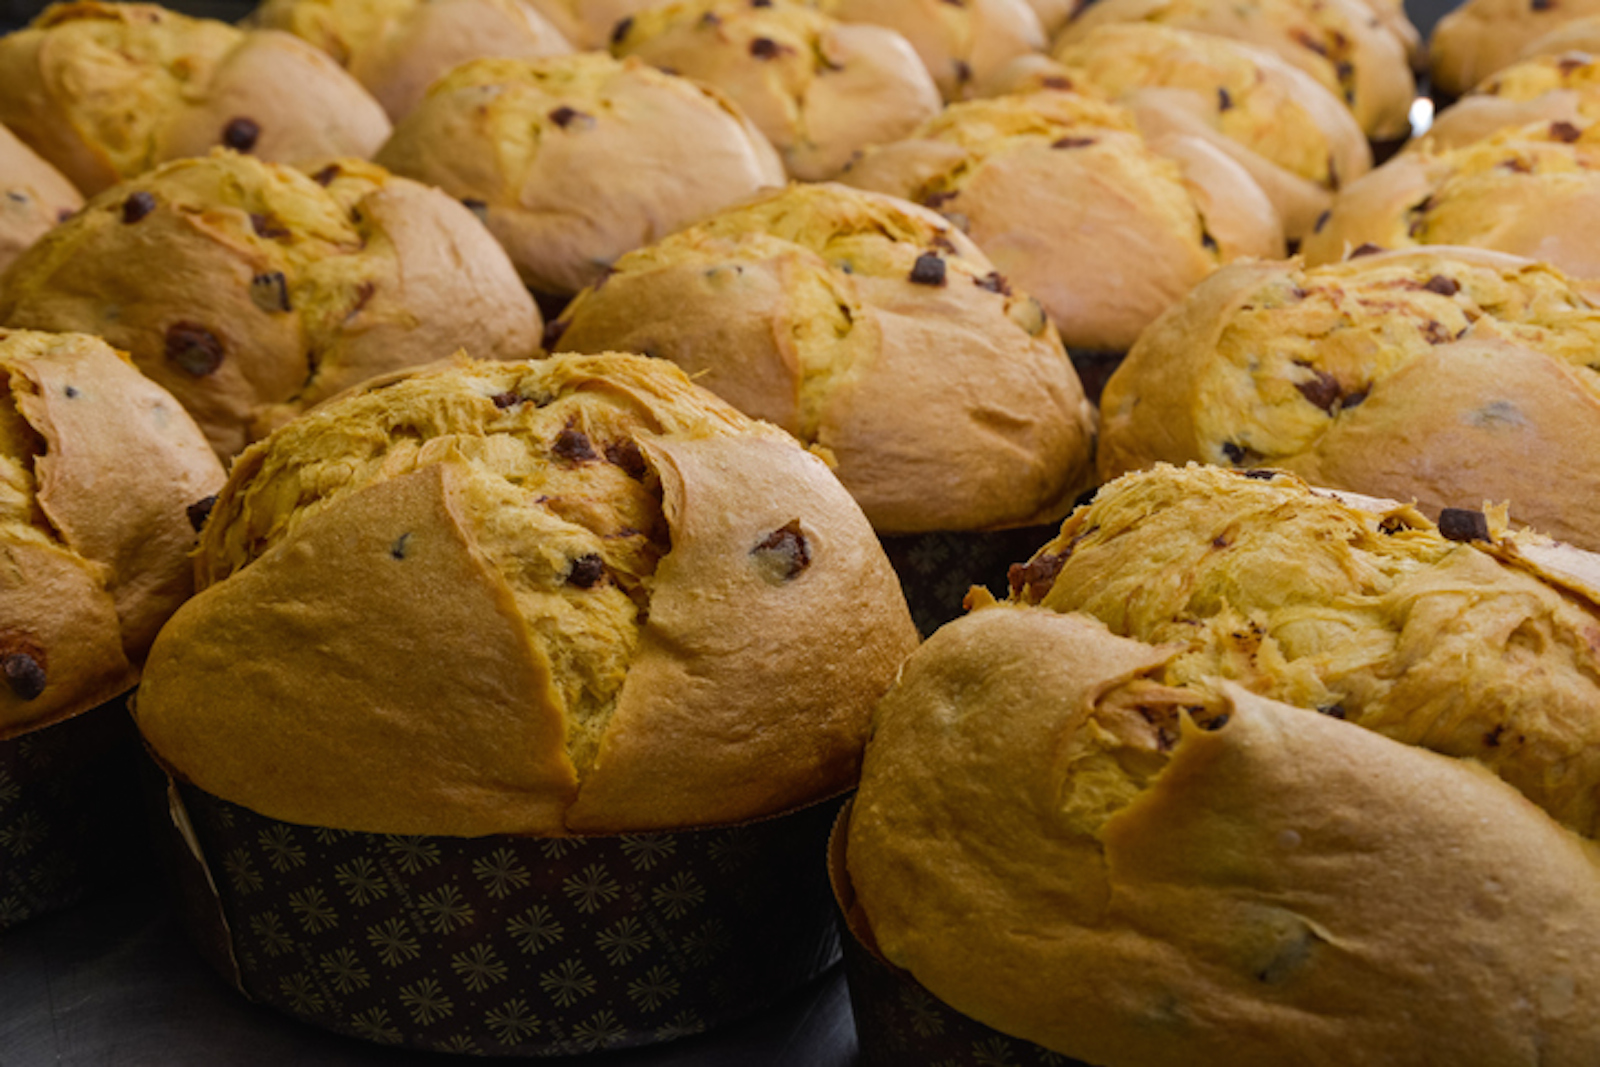 In Milan, two days of events with the "Panettone artists"